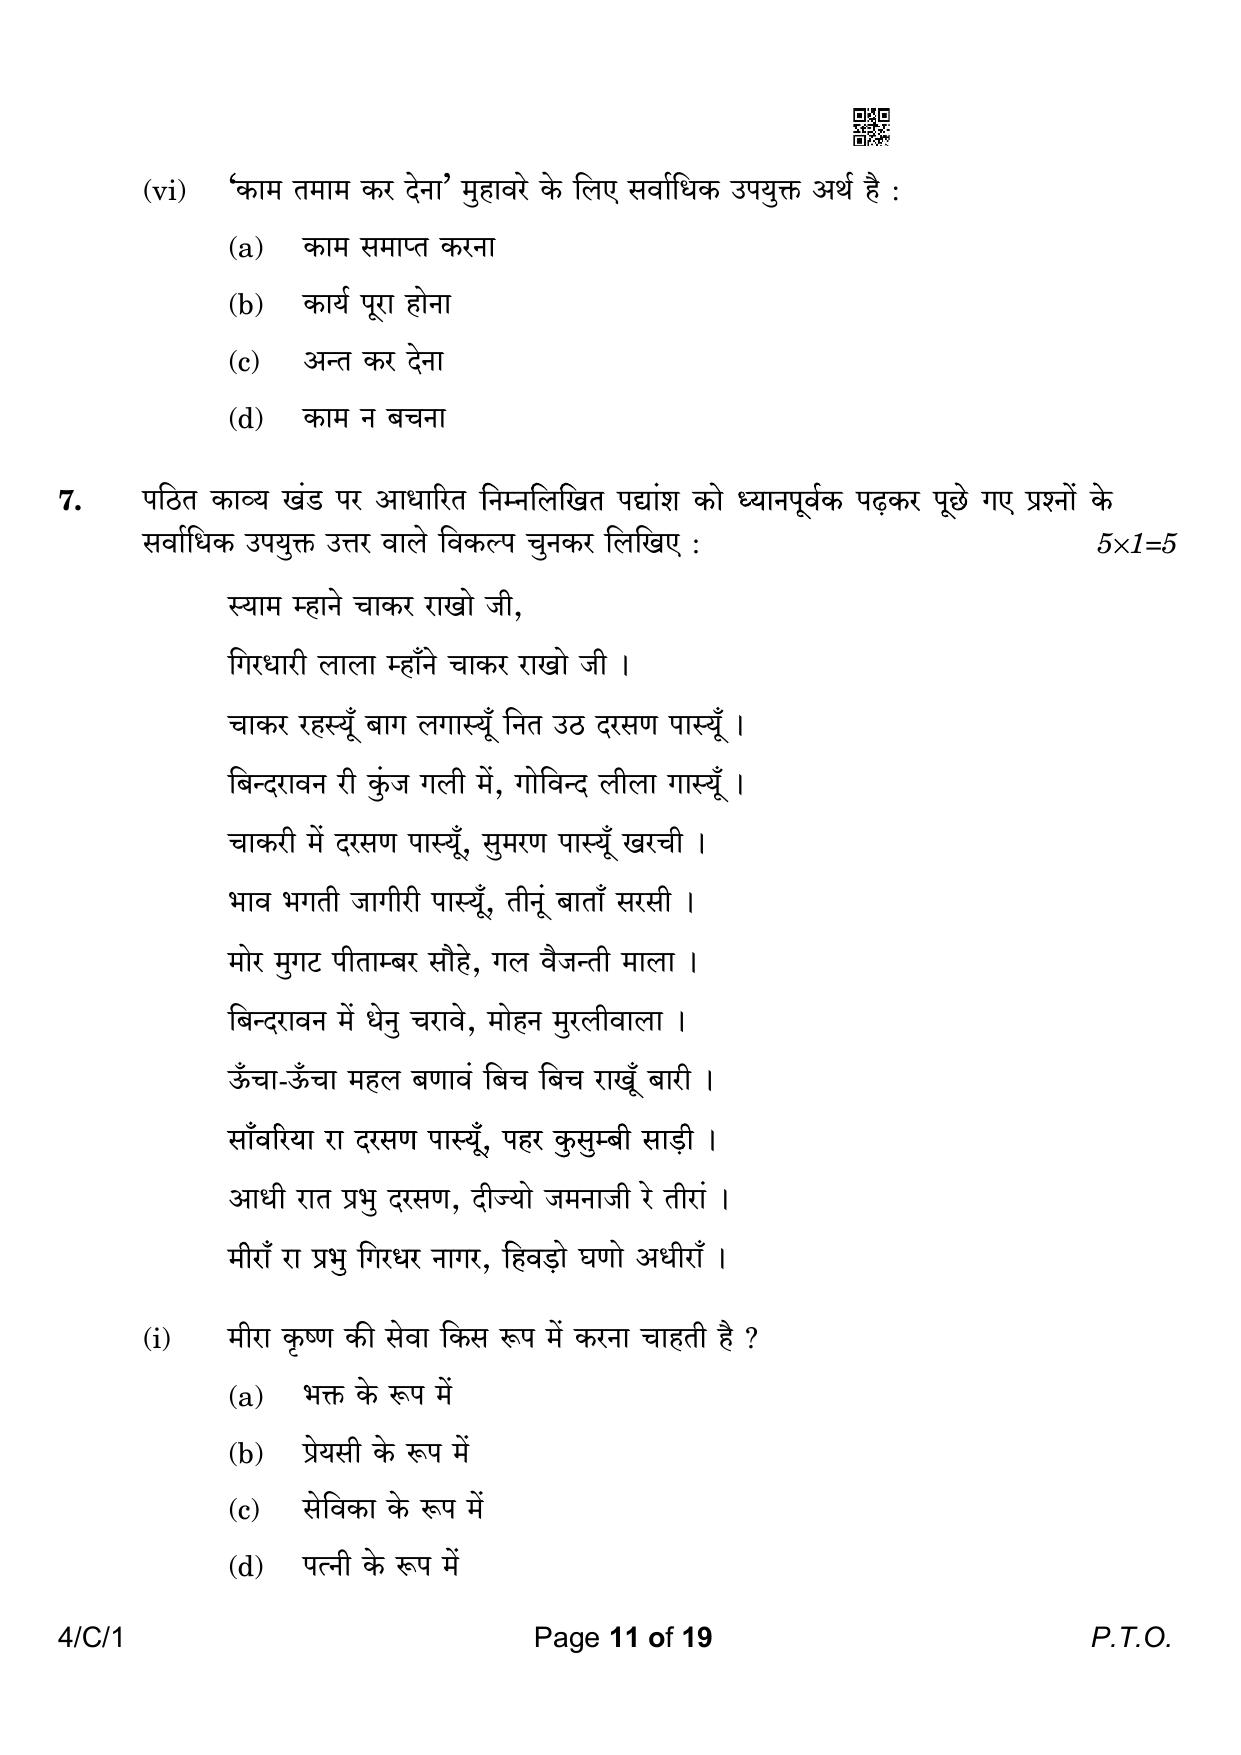 CBSE Class 10 4-1 Hindi B 2023 (Compartment) Question Paper - Page 11